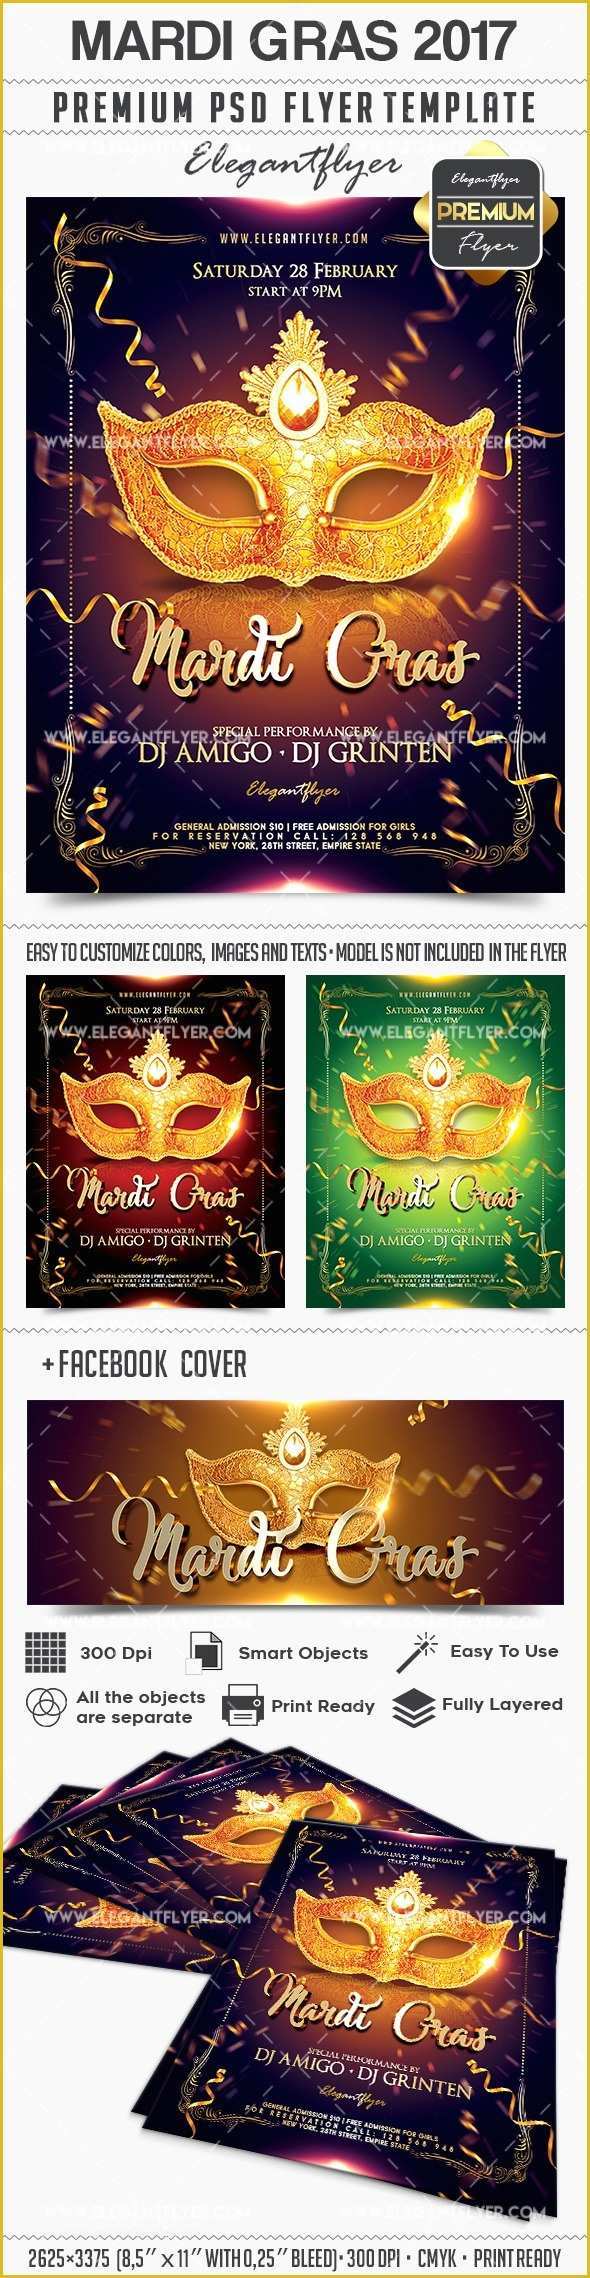 Mardi Gras Flyer Template Free Download Of Mardi Gras 2017 – Flyer Psd Template – by Elegantflyer